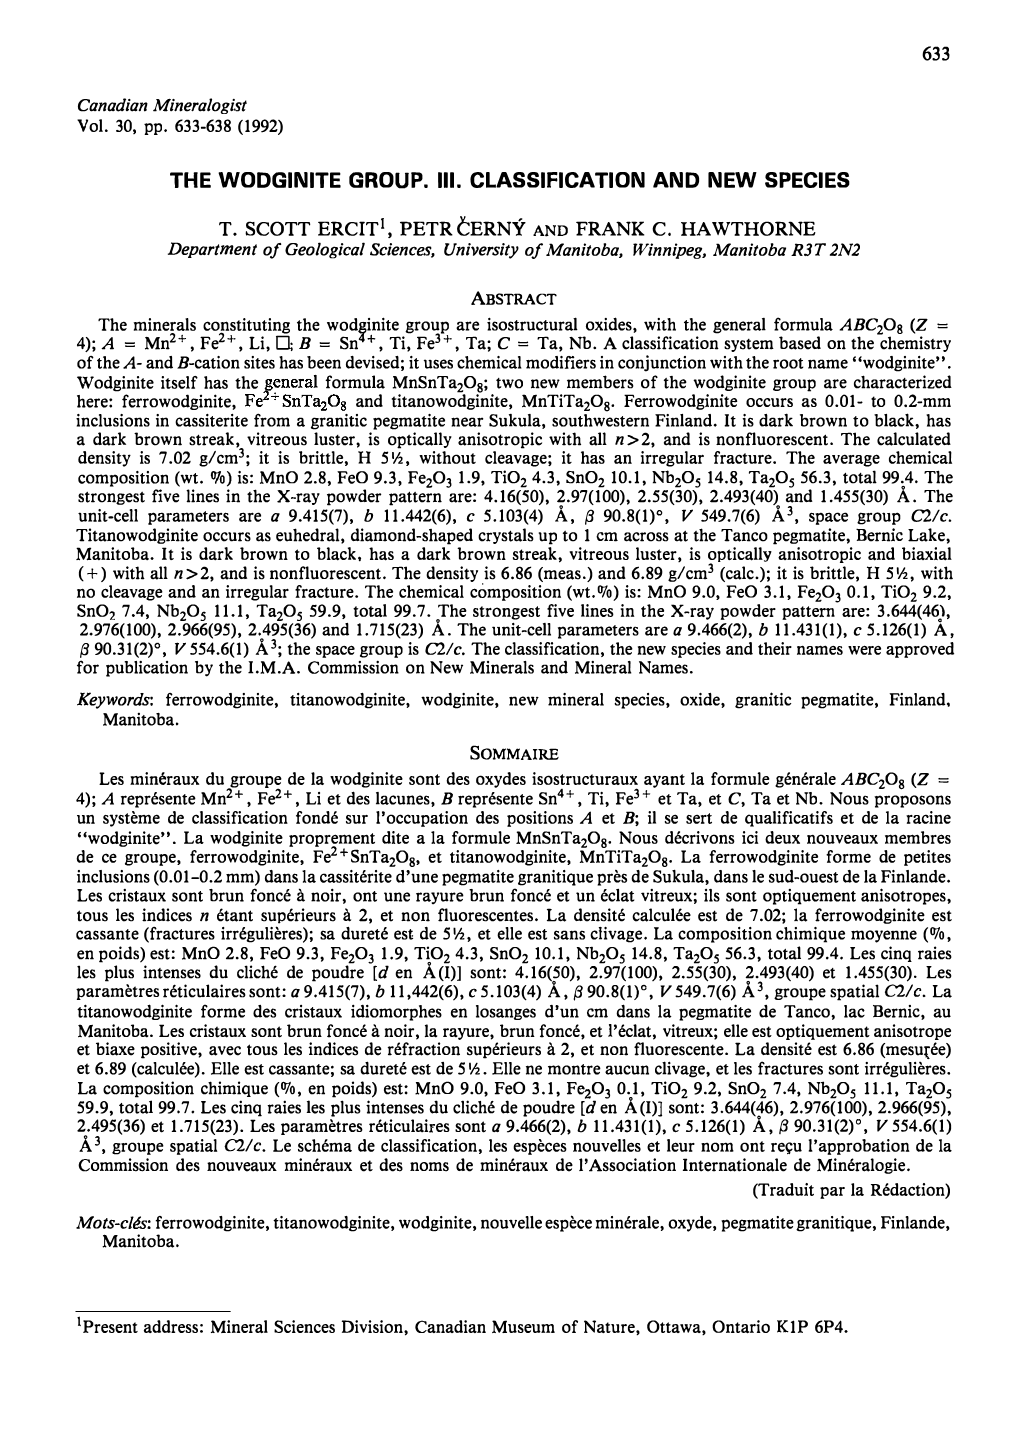 THE WODGINITE GROUP. Ill. CLASSIFICATION and NEW SPECIES